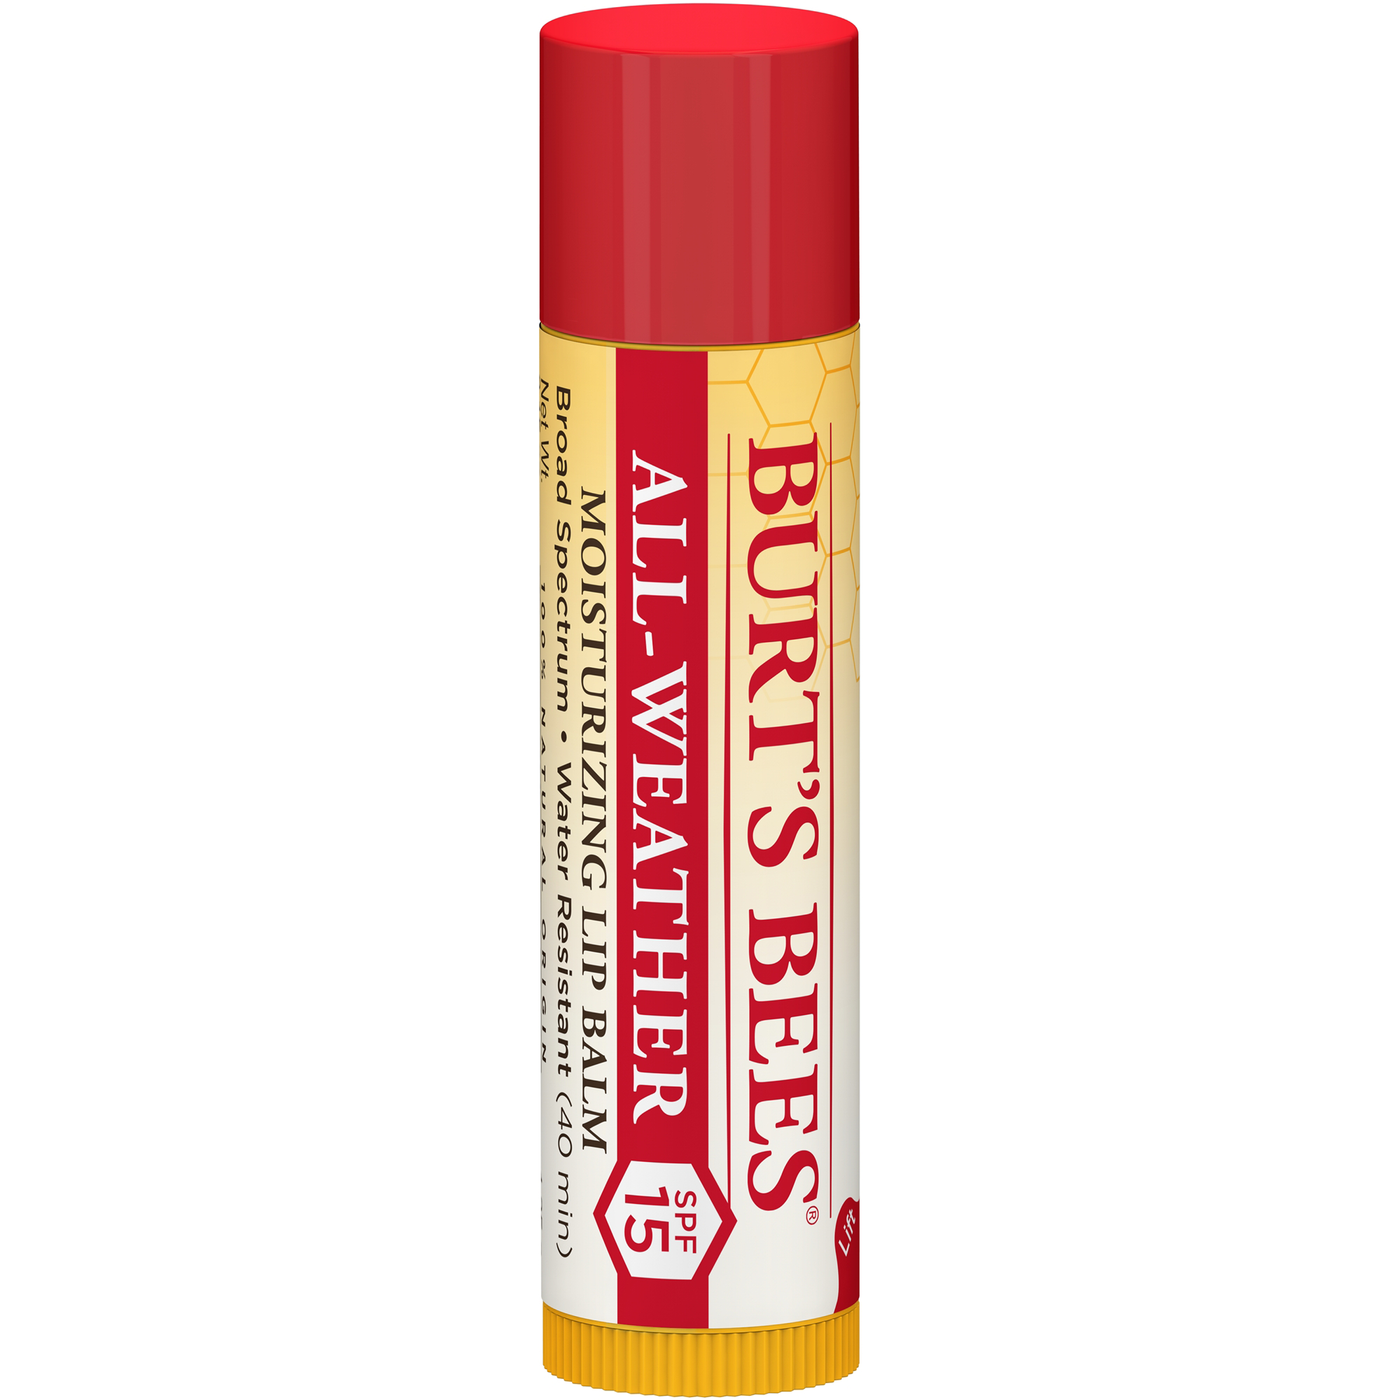 Burt's Bees Lip Balm All-Weather 0.15oz Curated Wellness